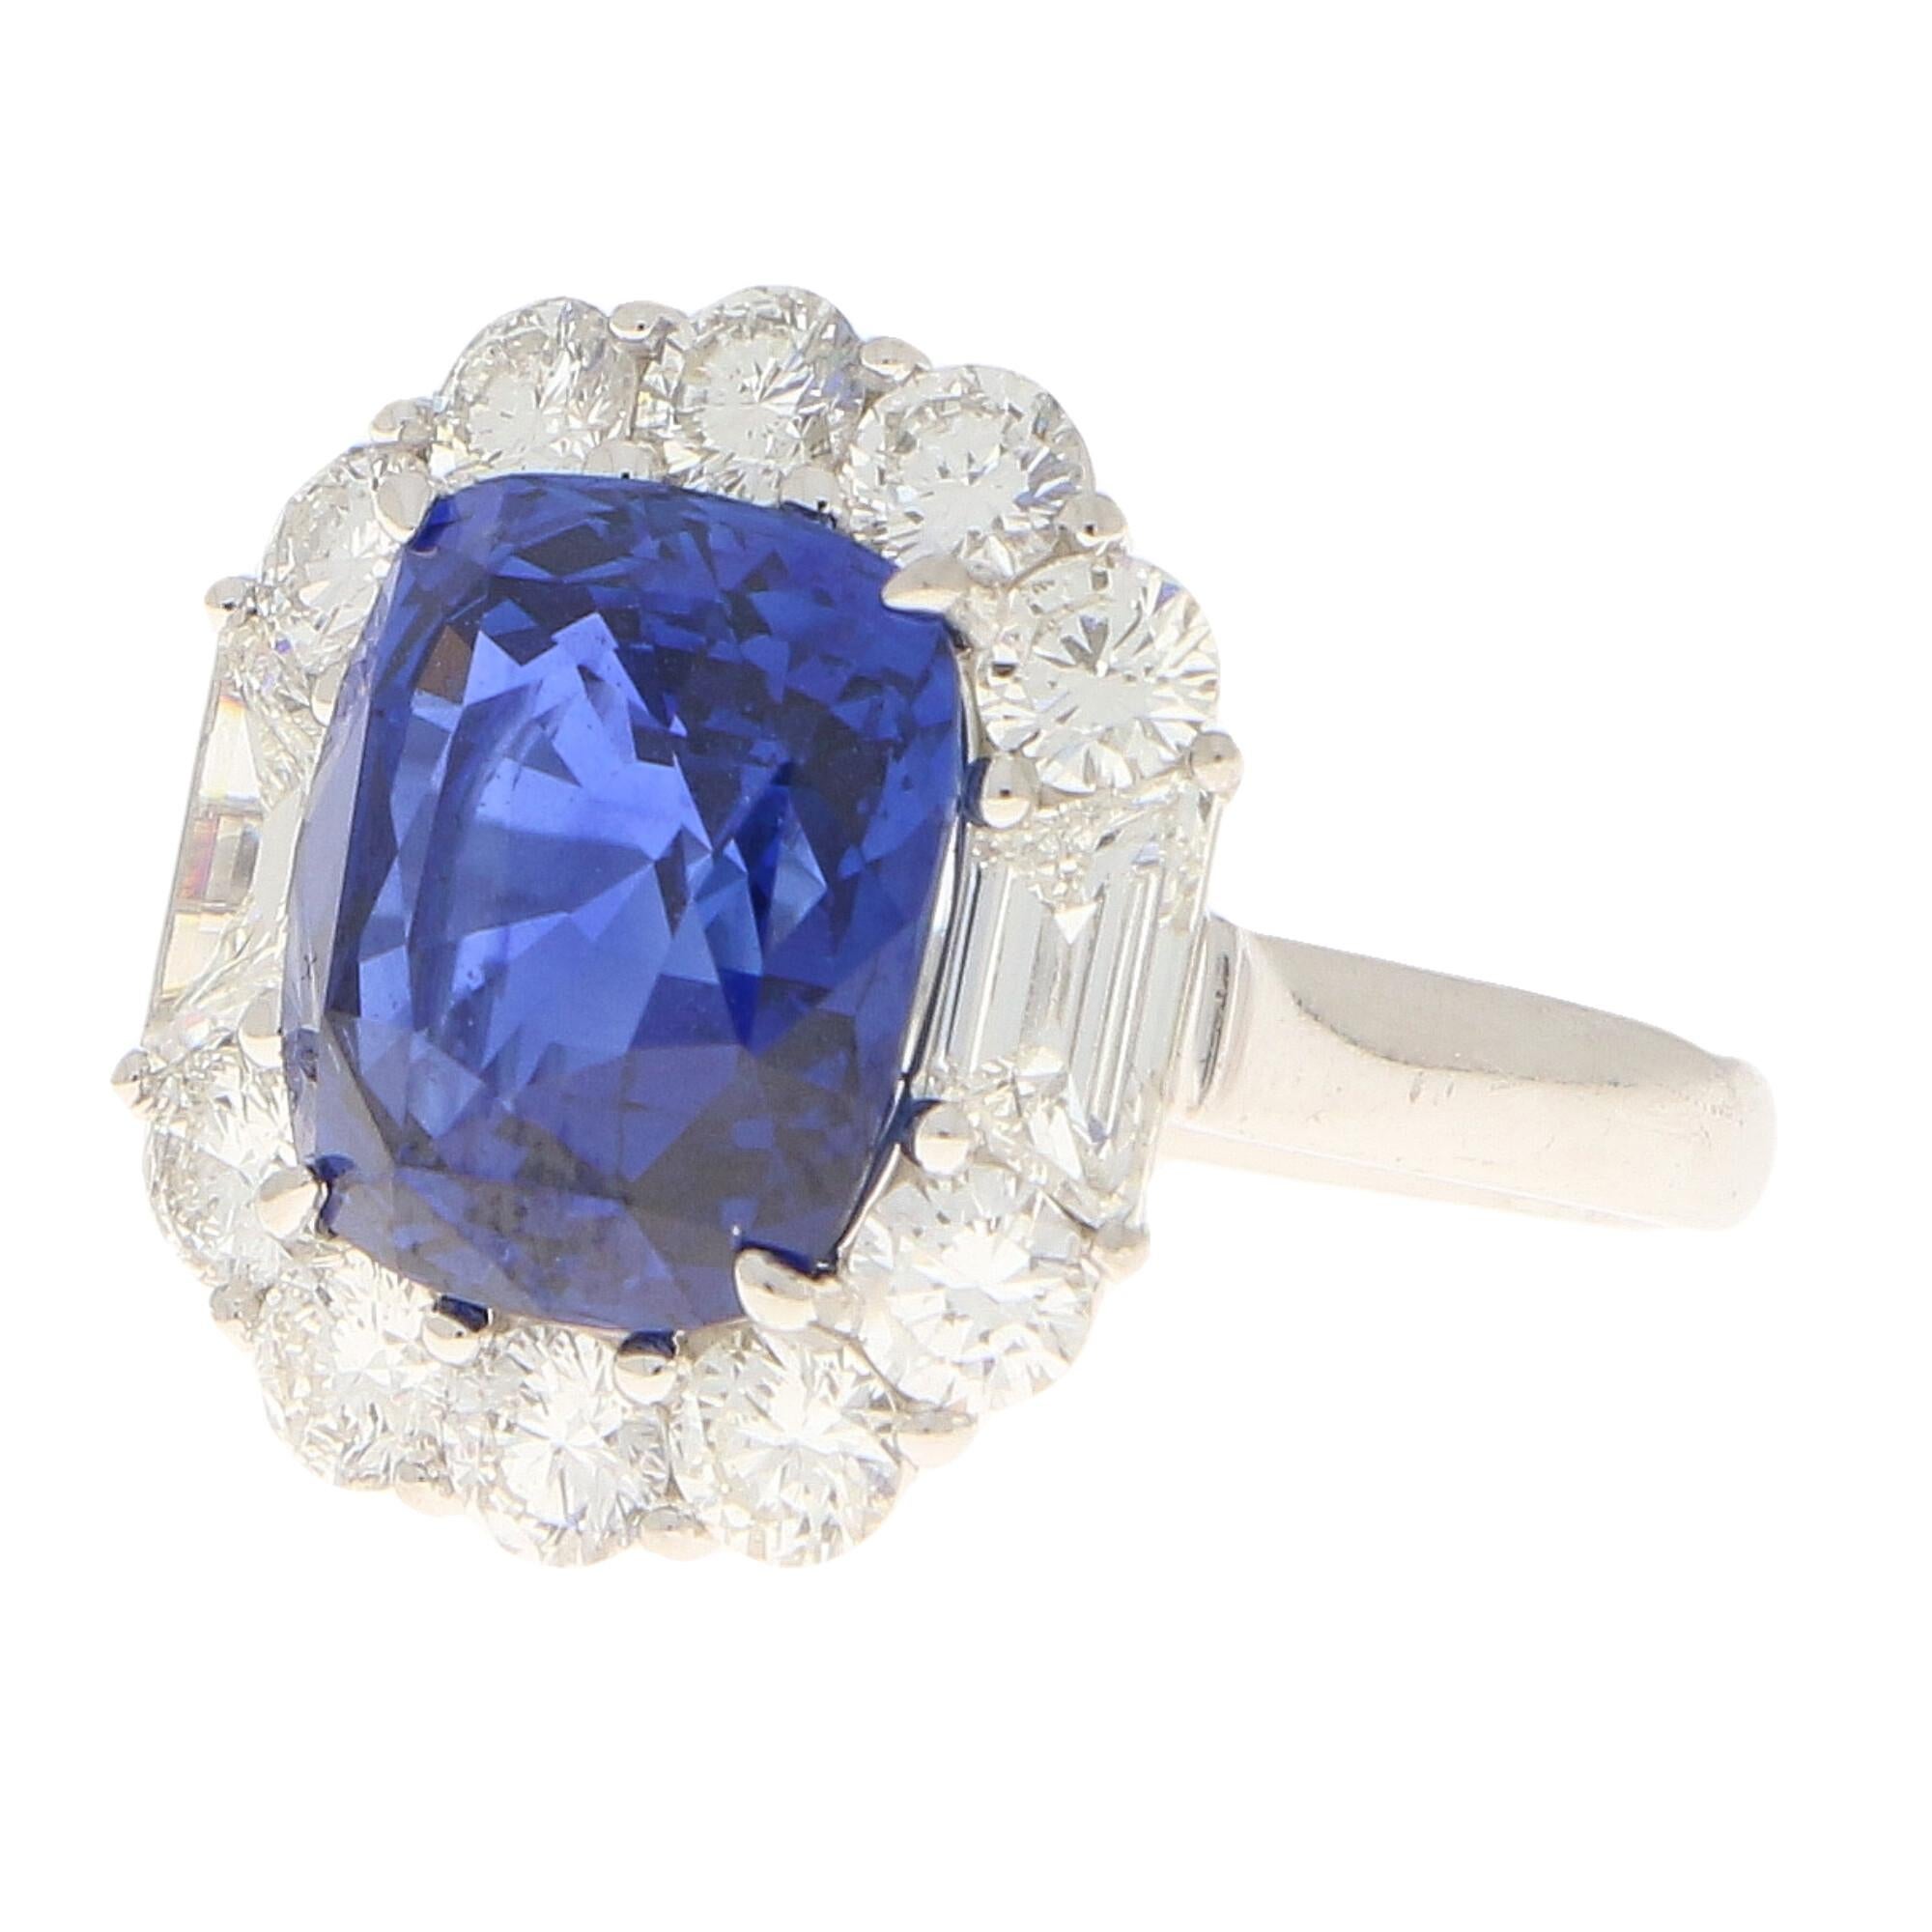 A truly stunning Art Deco inspired sapphire and diamond cluster ring set in platinum.

The piece is centrally set with an astounding 7.62 carat royal blue cushion cut sapphire which is securely four-claw set in platinum. The sapphire has a desirable